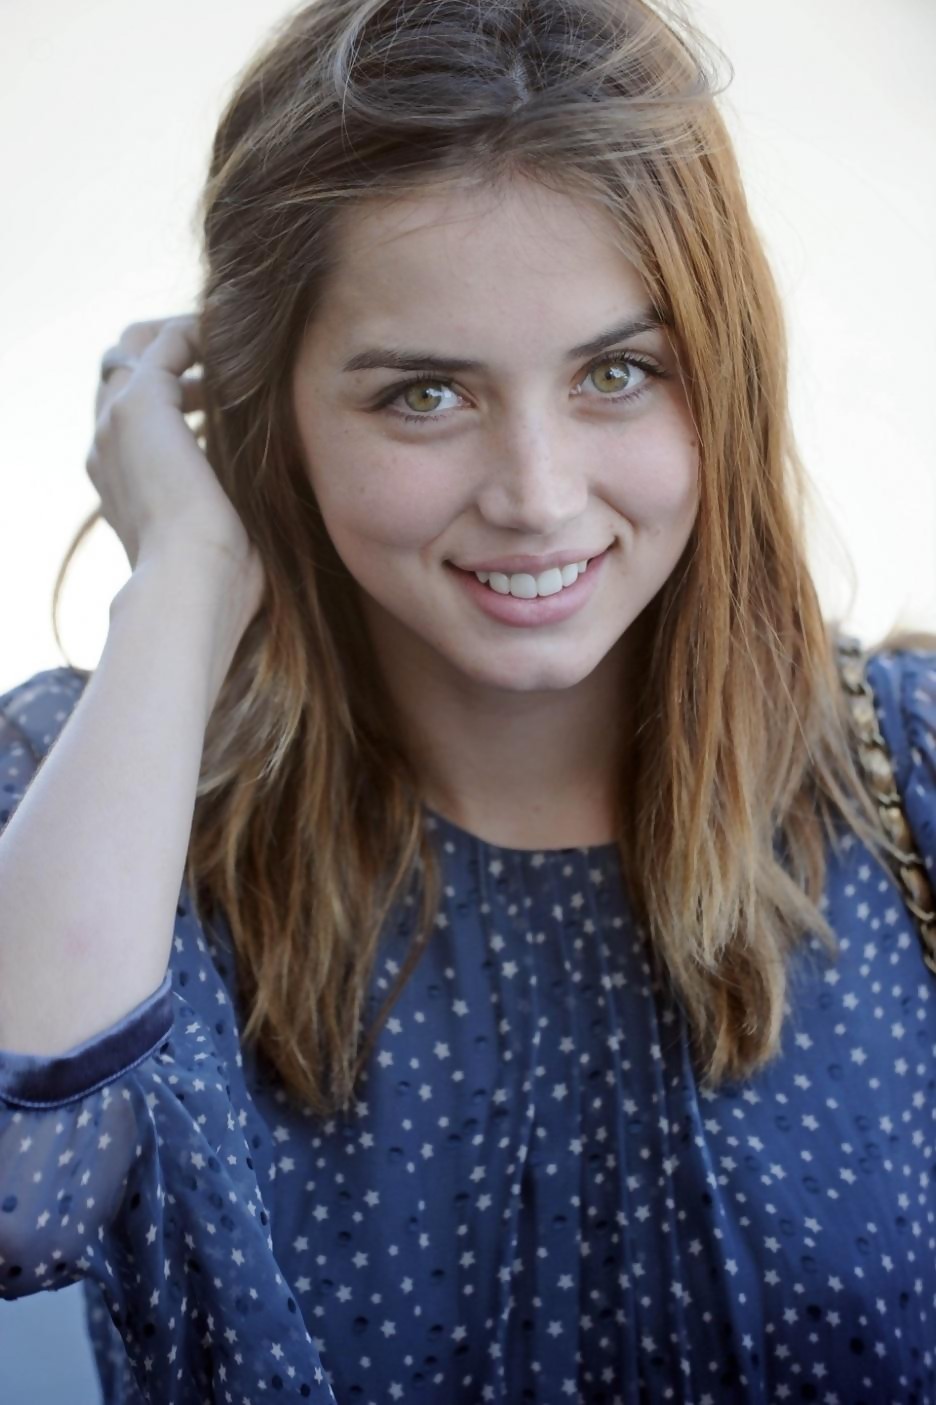 Ana De Armas Hd Wallpapers Free Download In High Quality And Resolution